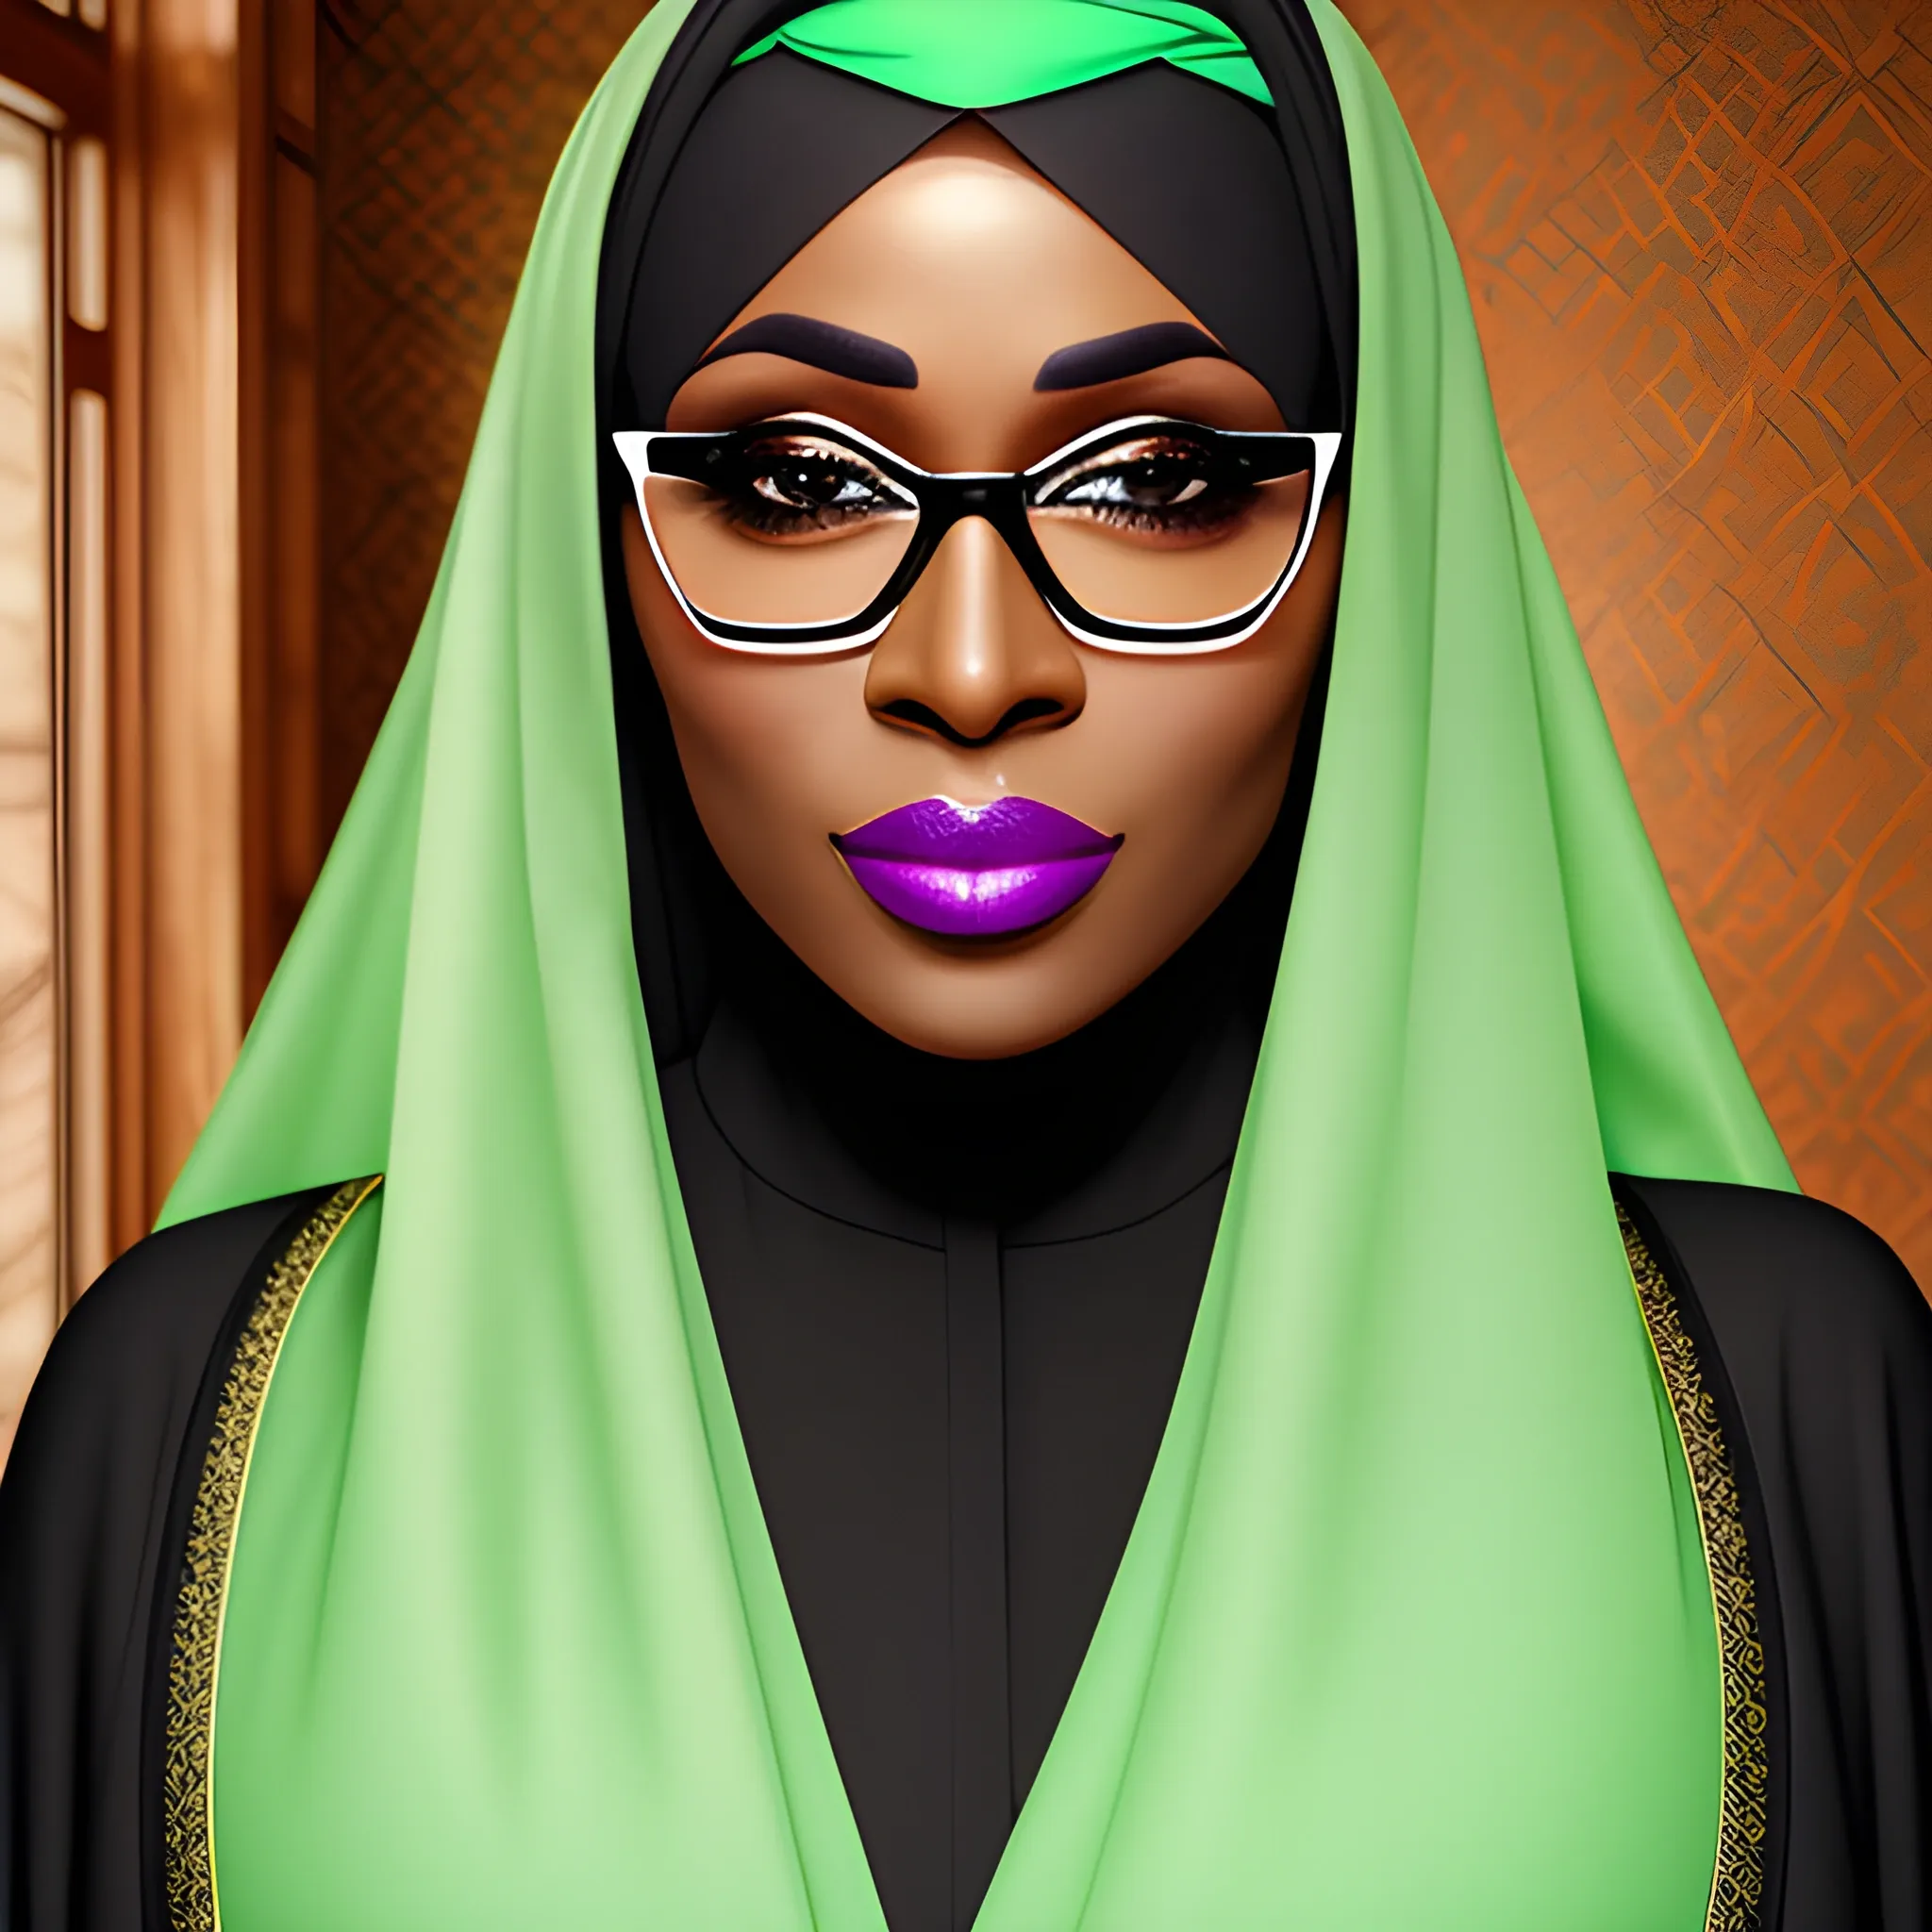 African women, long oval face, dimple chin, small eyes, high bridge nose, thick lips, wearing green hijab, face fully opened, black abaya, half circle black eye glass.  Realistic highly detailed portrait picture. ,Romanticism